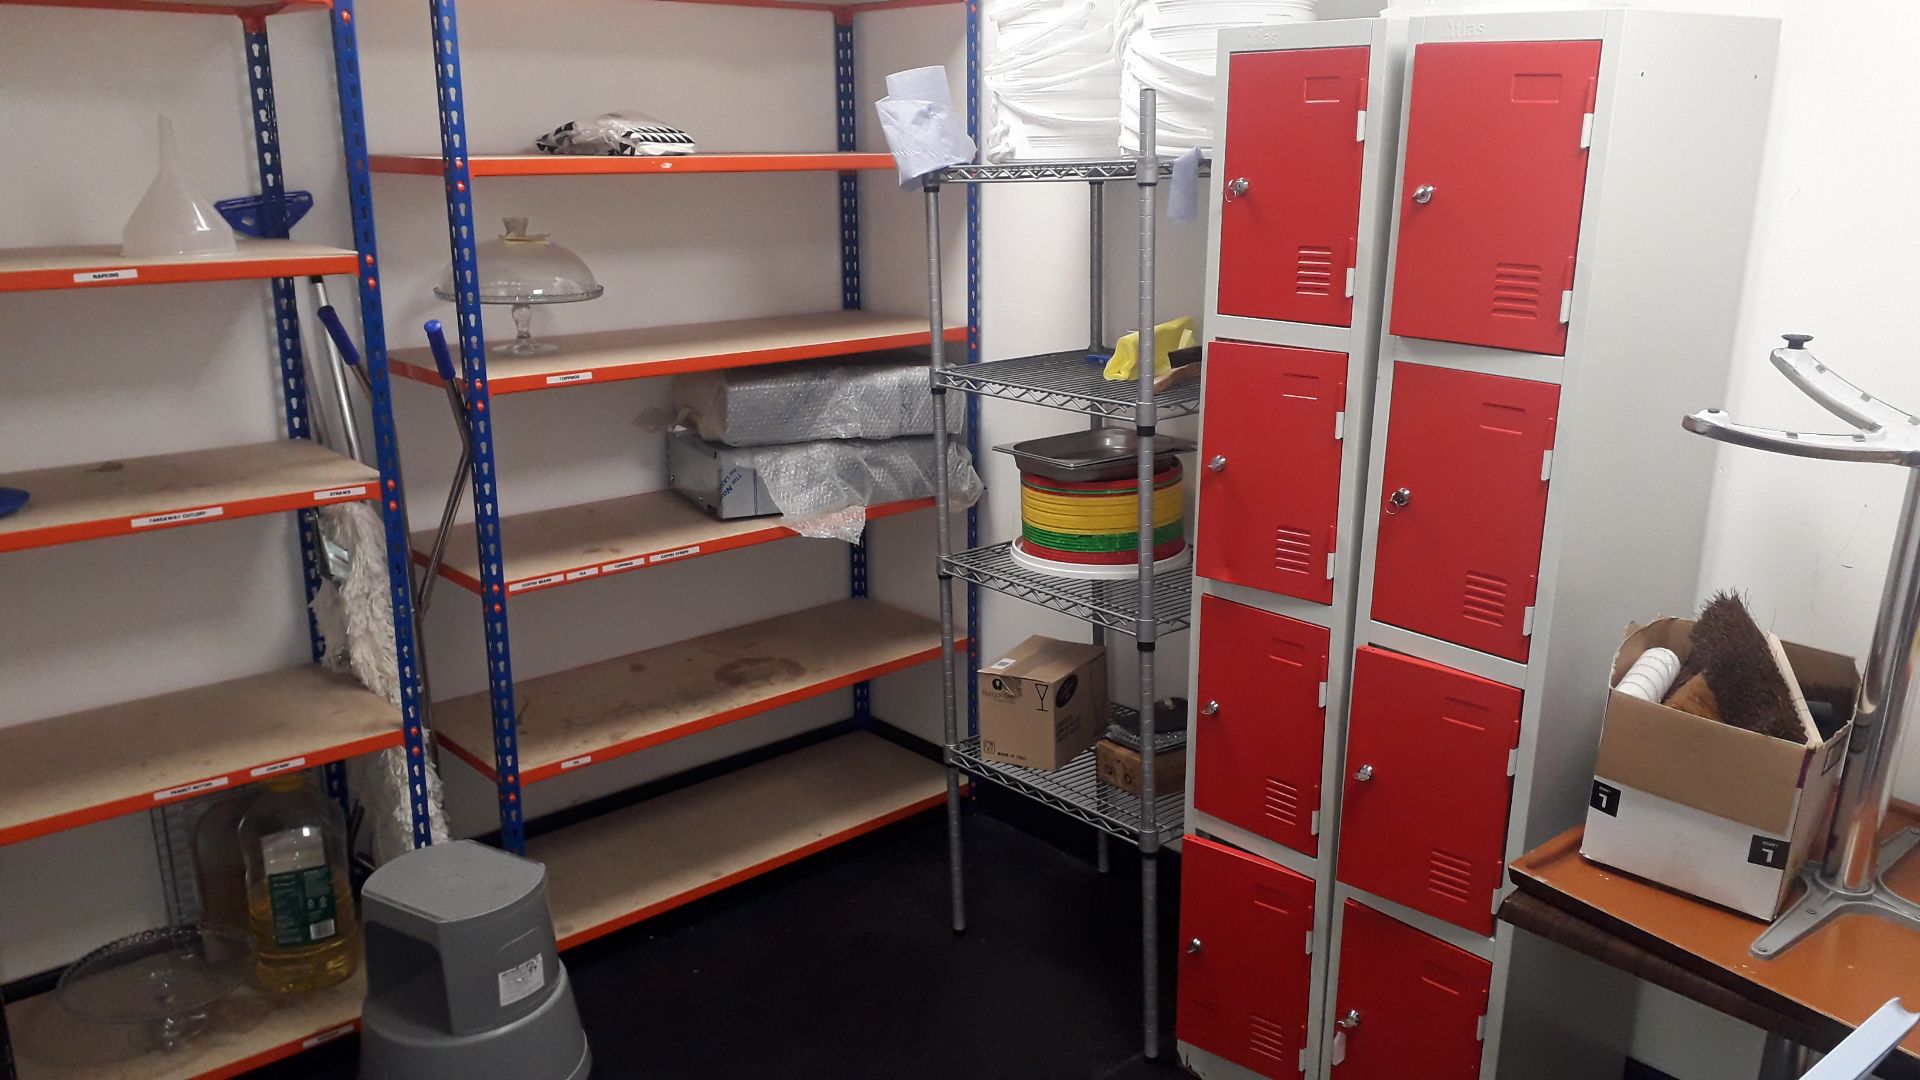 Contents of store room to include 3 bays boltless shelving, 2 x Atlas steel upright 4 door key